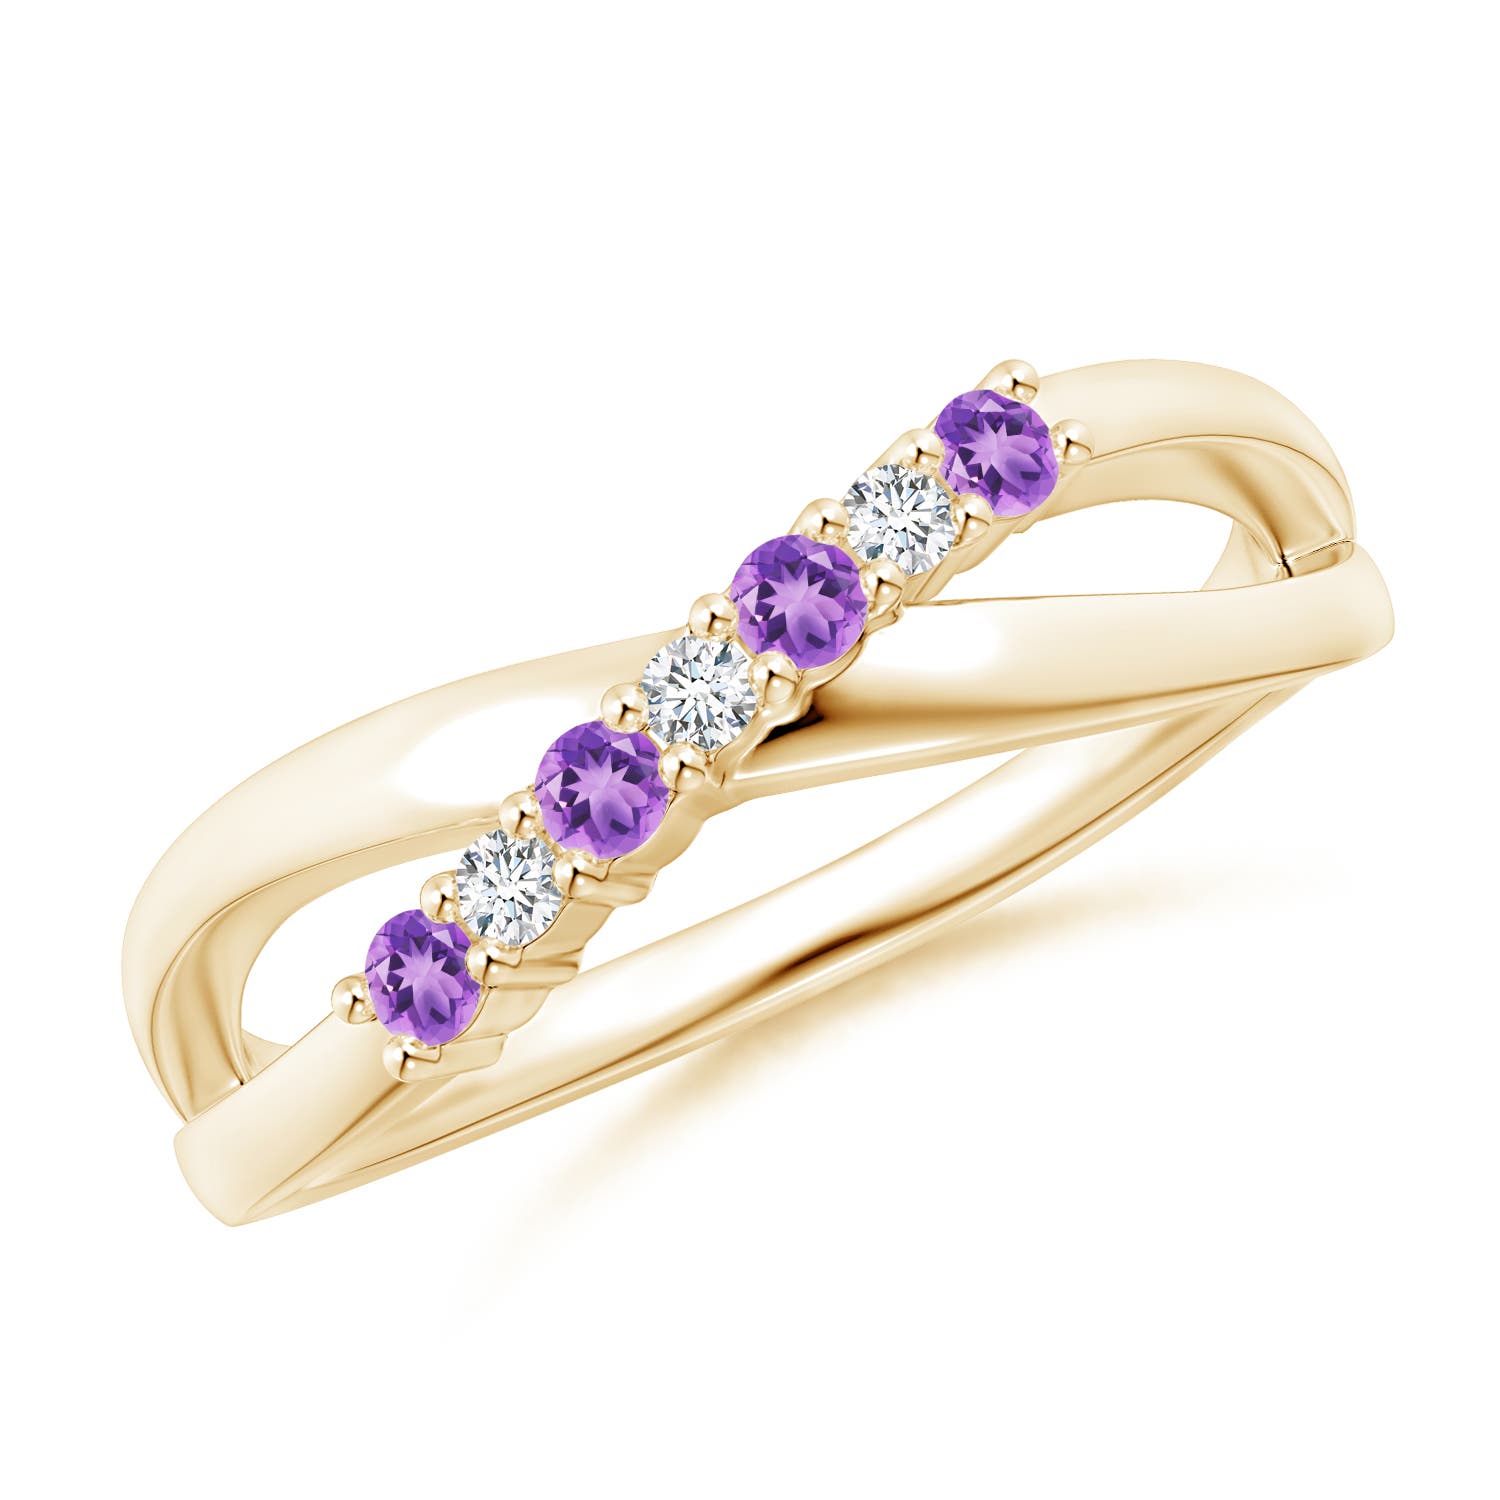 A - Amethyst / 0.18 CT / 14 KT Yellow Gold